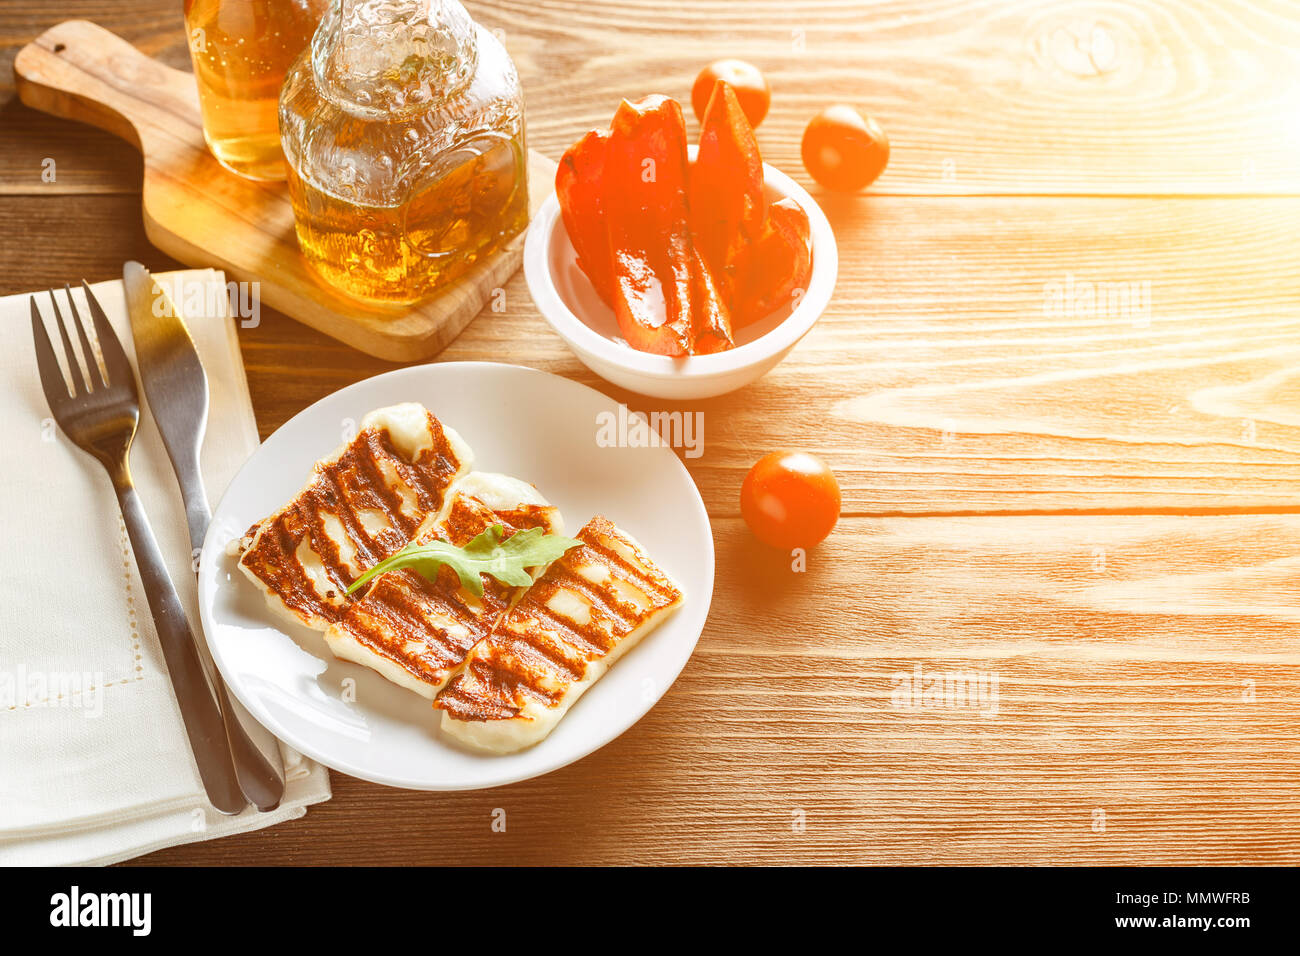 Halloumi grilled cheese with grilled bell peppers and tomatoes, copy space for text Stock Photo